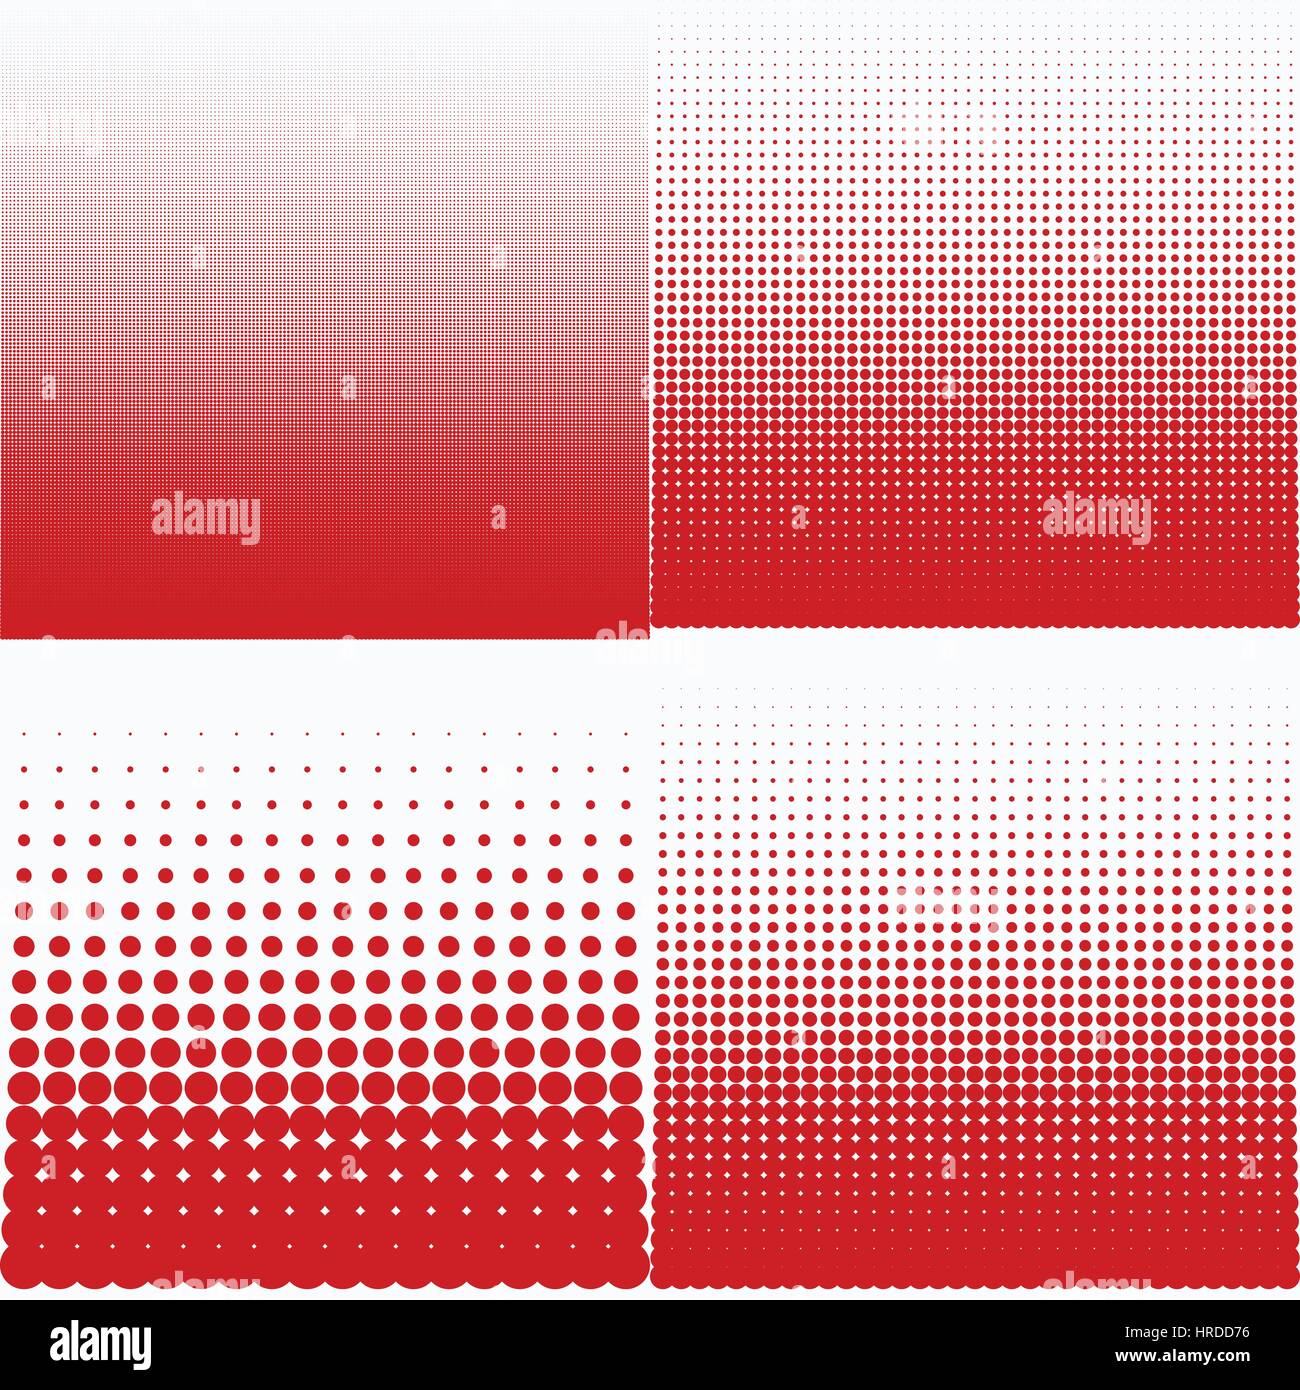 Vector illustration of a halftone pattern Stock Vector